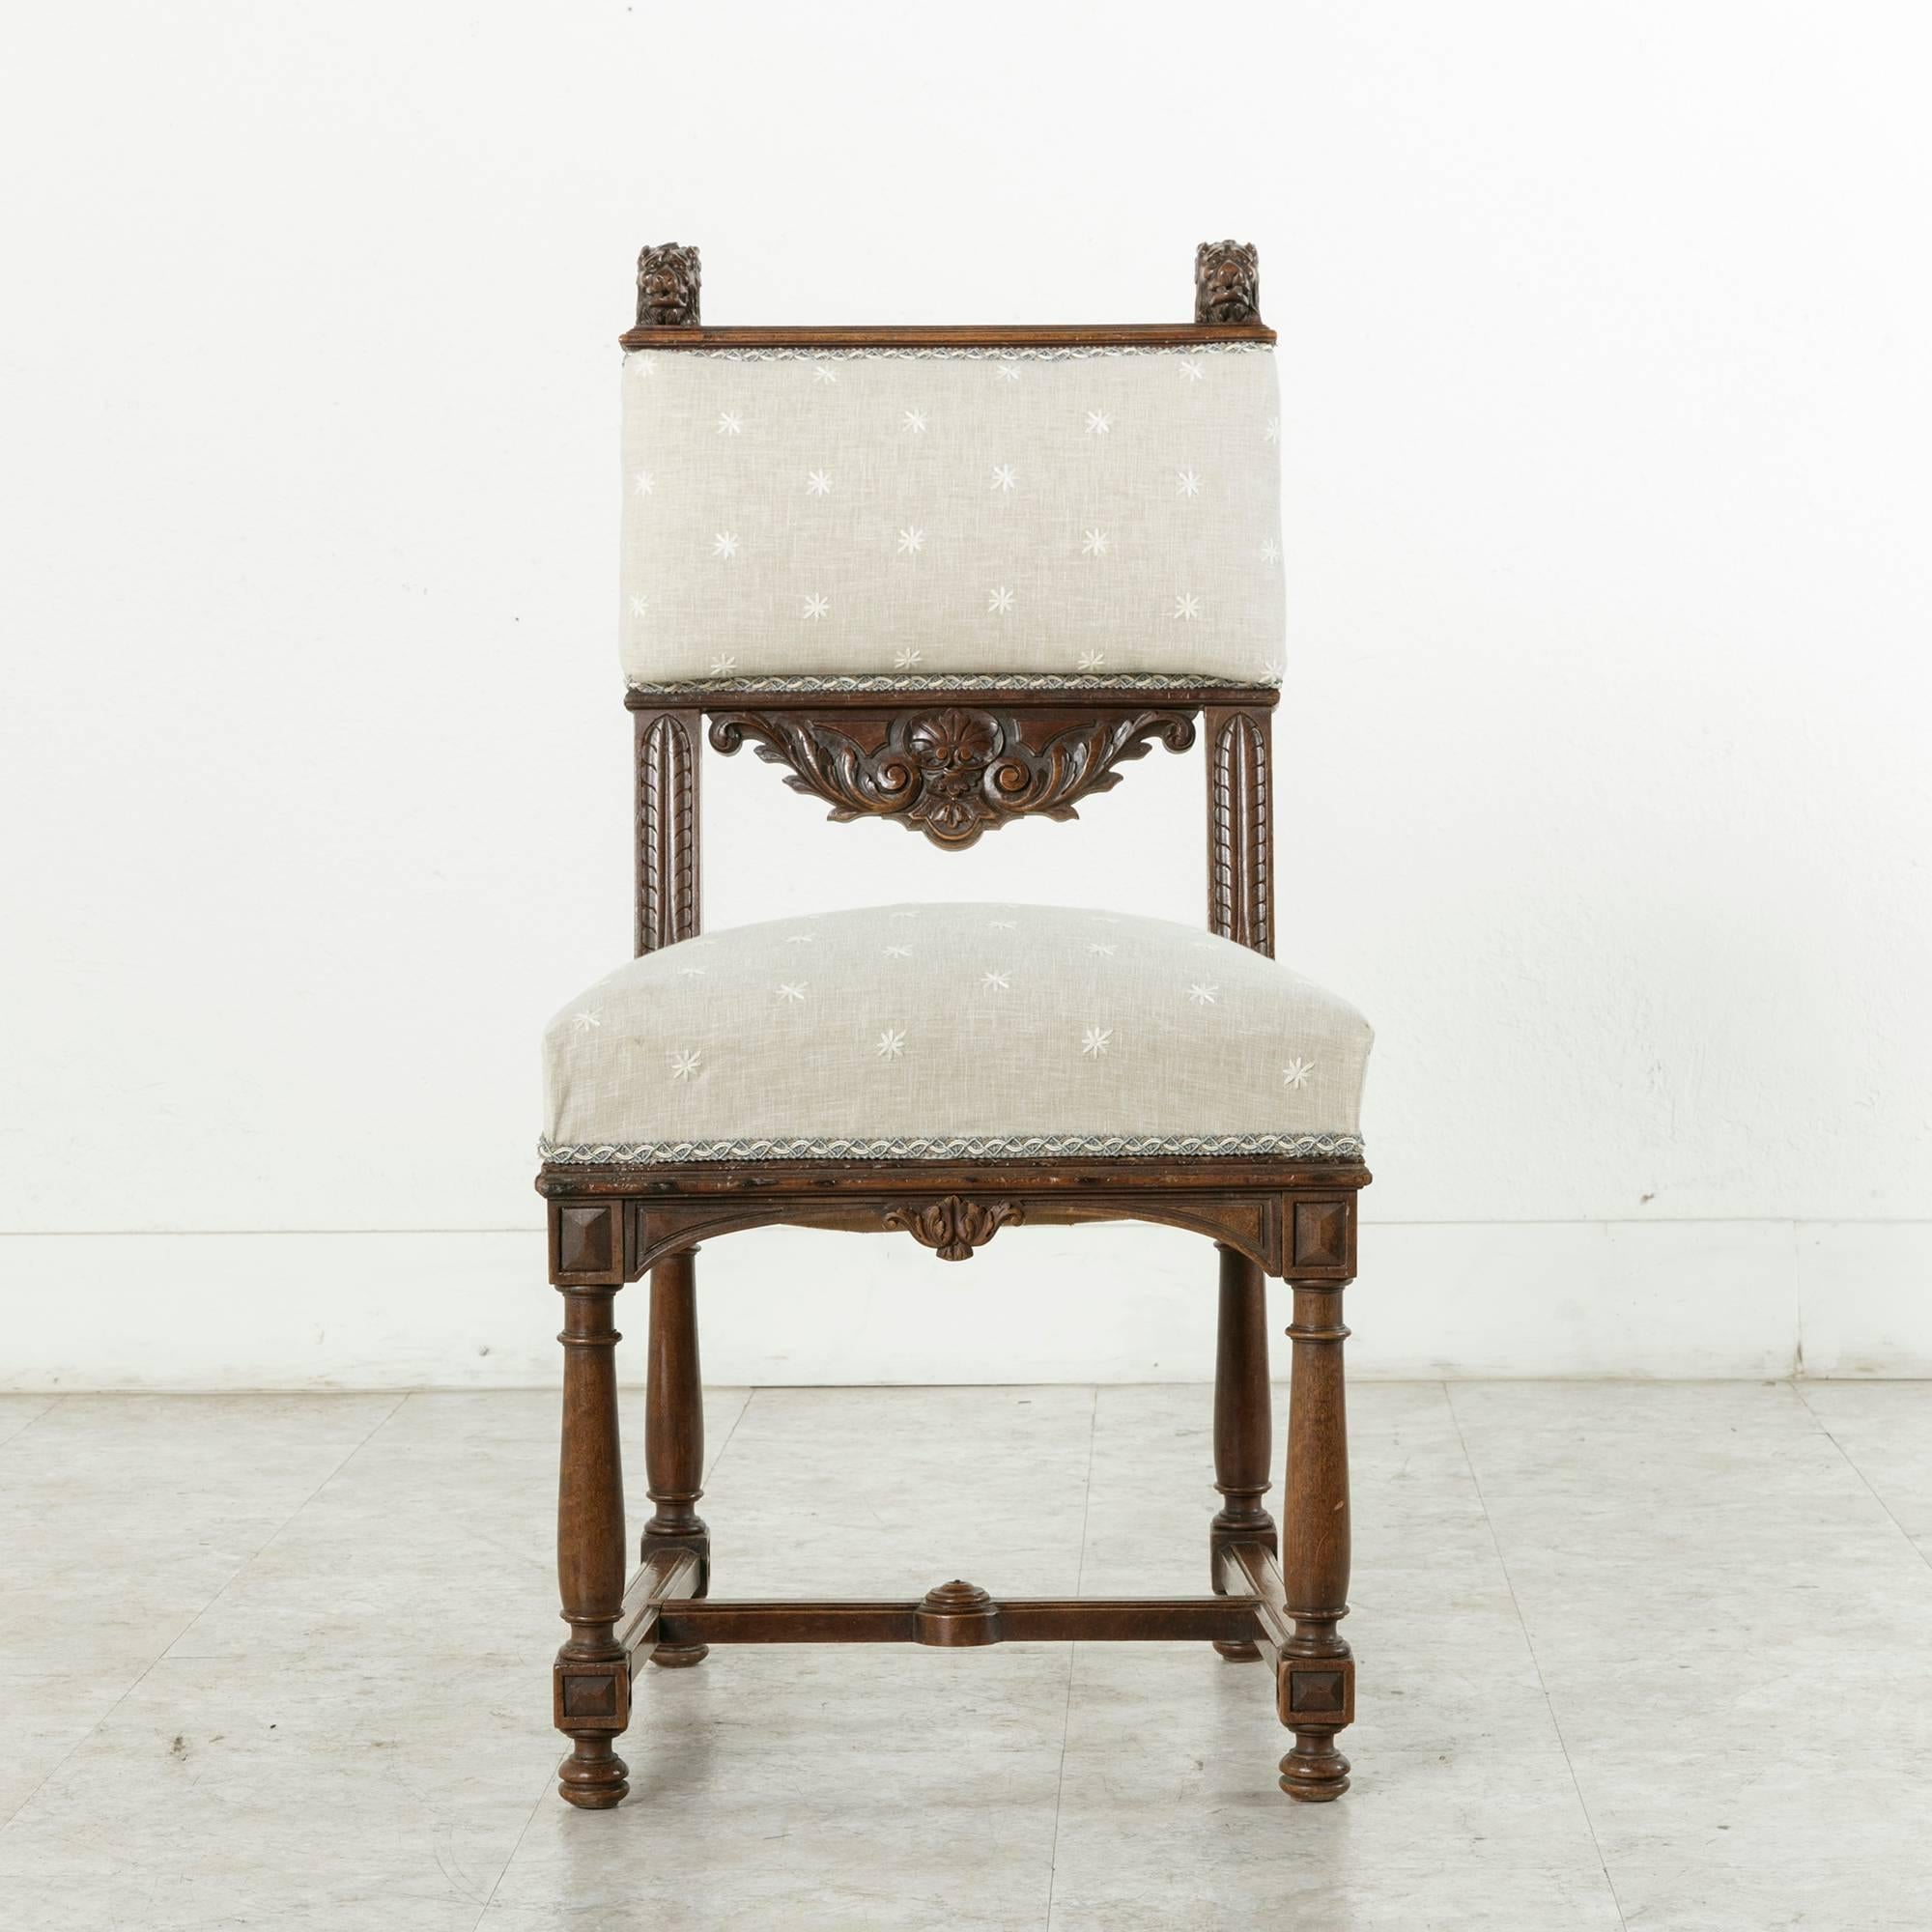 This French hand-carved walnut side chair in the Henri II Renaissance style rests on four tapered column legs joined by an H-stretcher. Its upholstered back is embellished with lion's heads at the top and a deep relief carved scallop with central